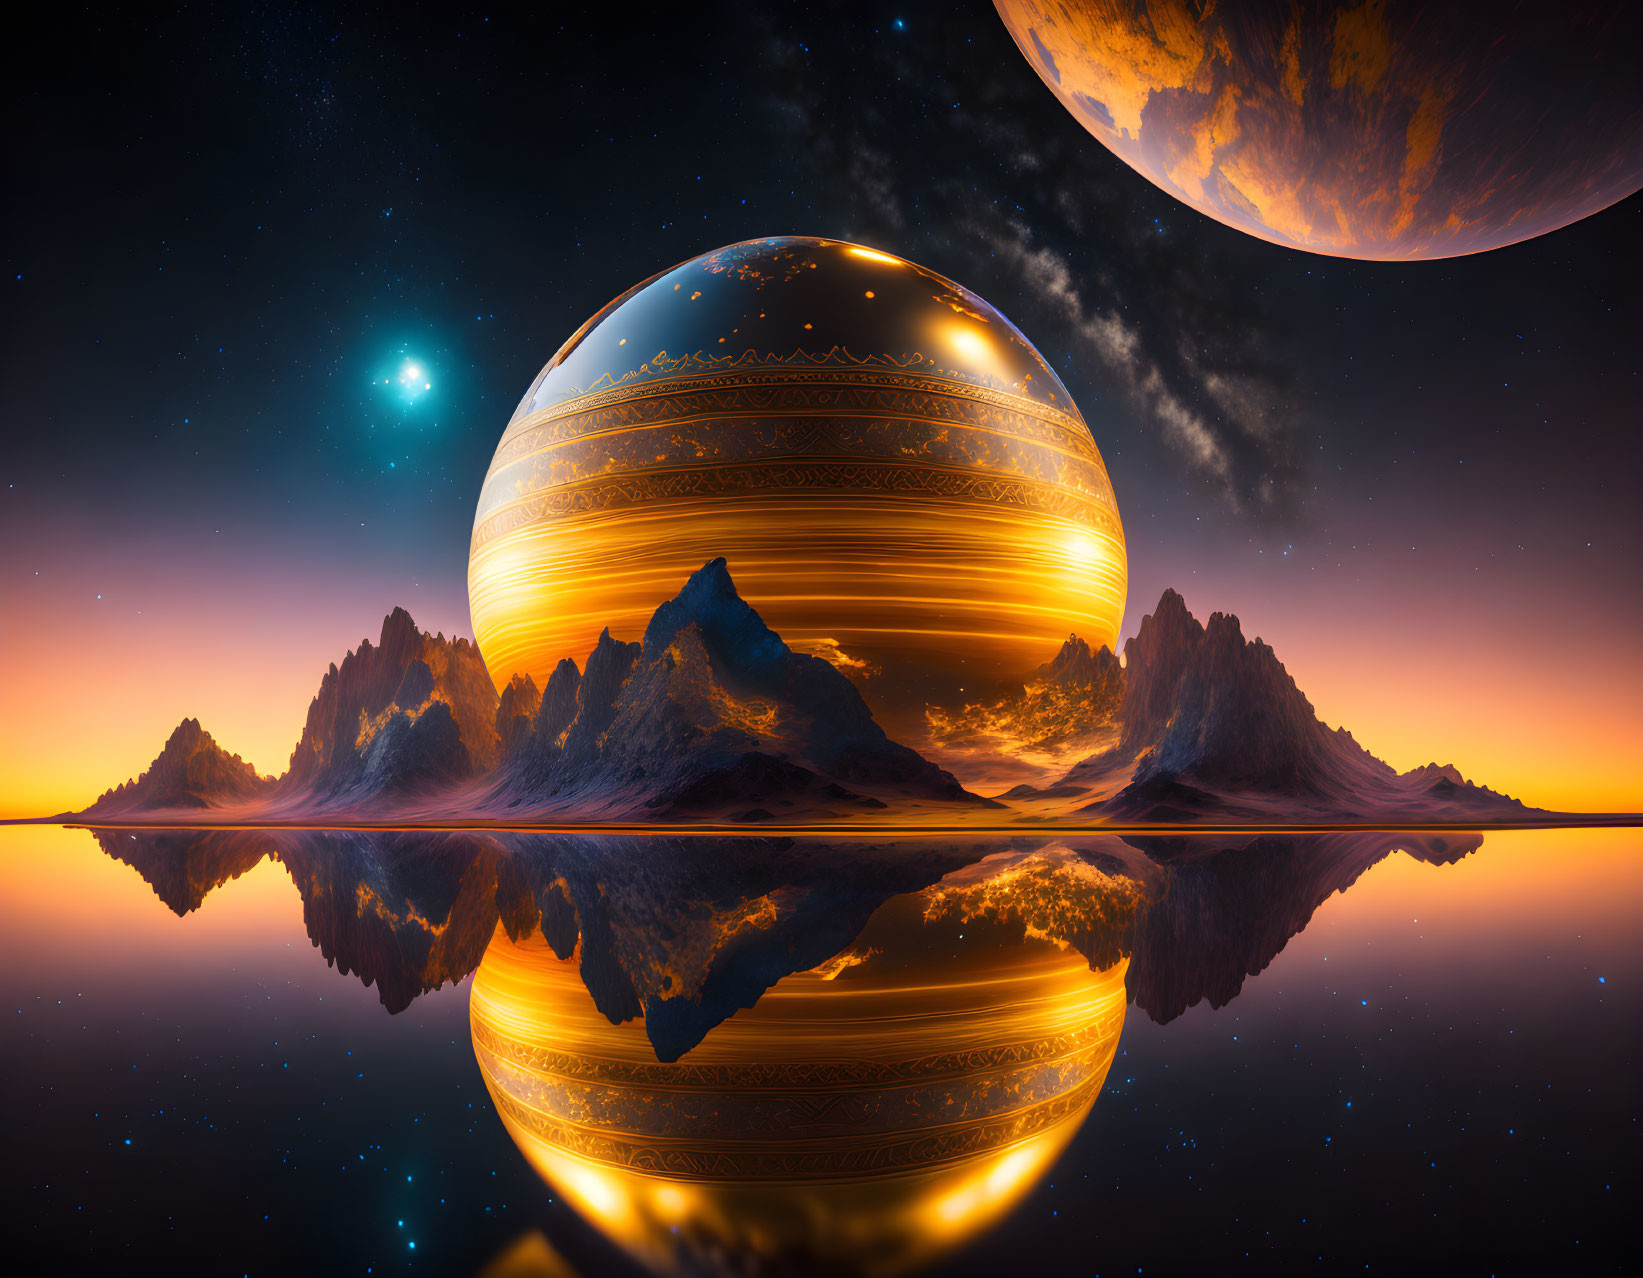 Surreal landscape with mountains, reflective surface, planets, and stars